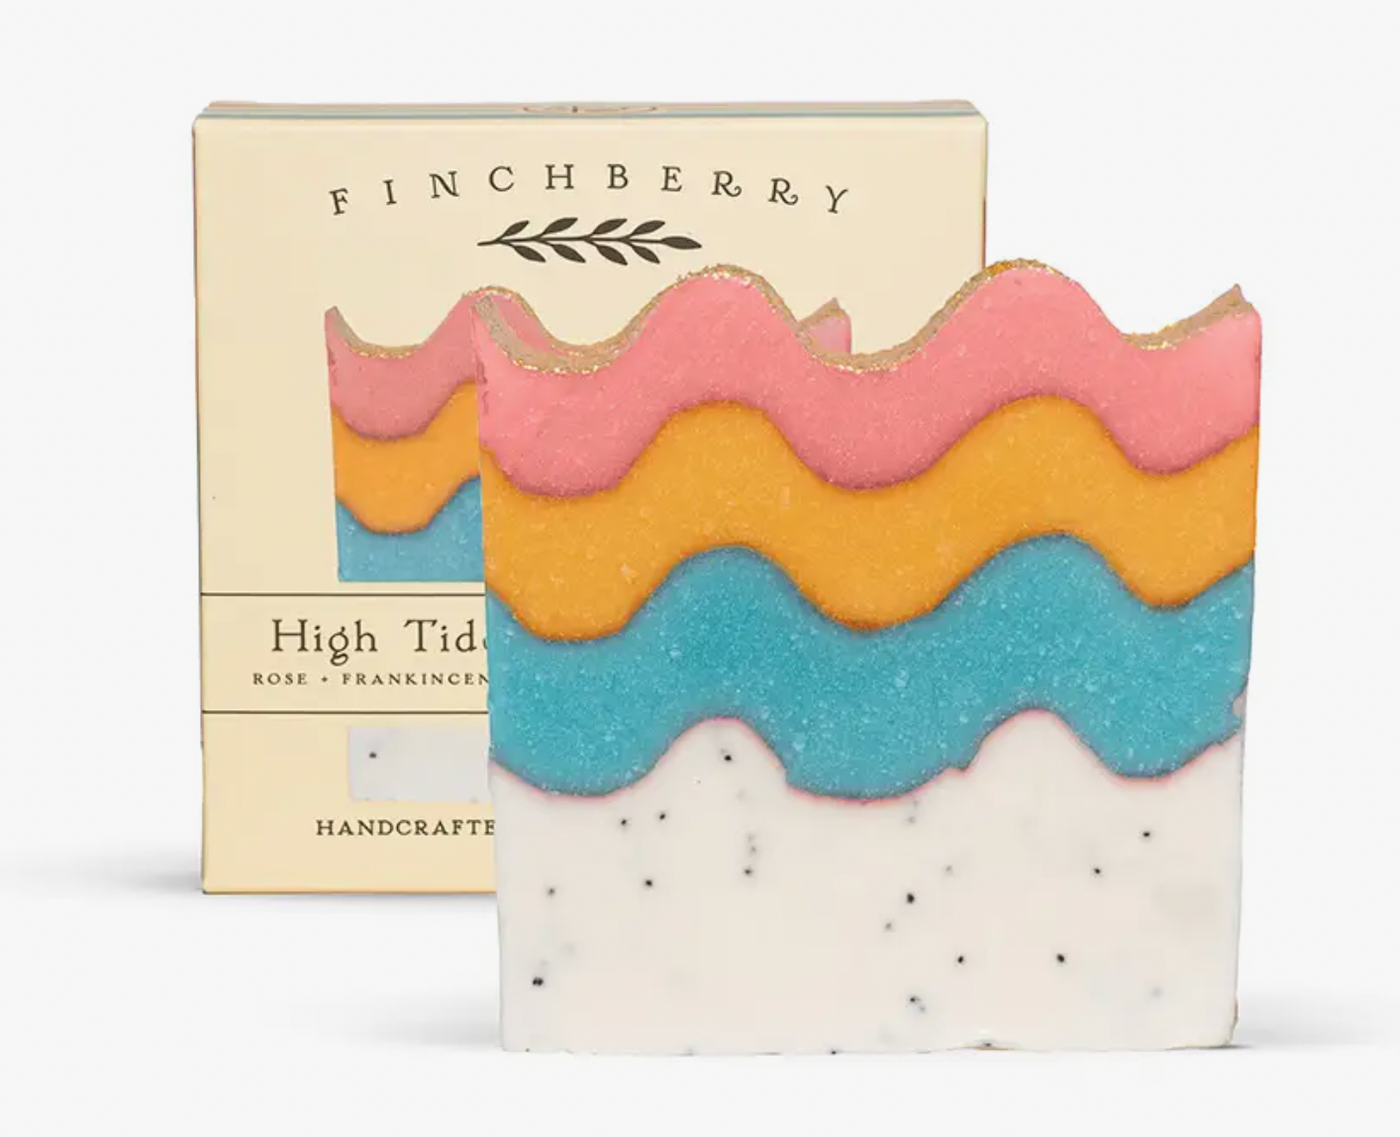 High Tide Soap (Boxed)